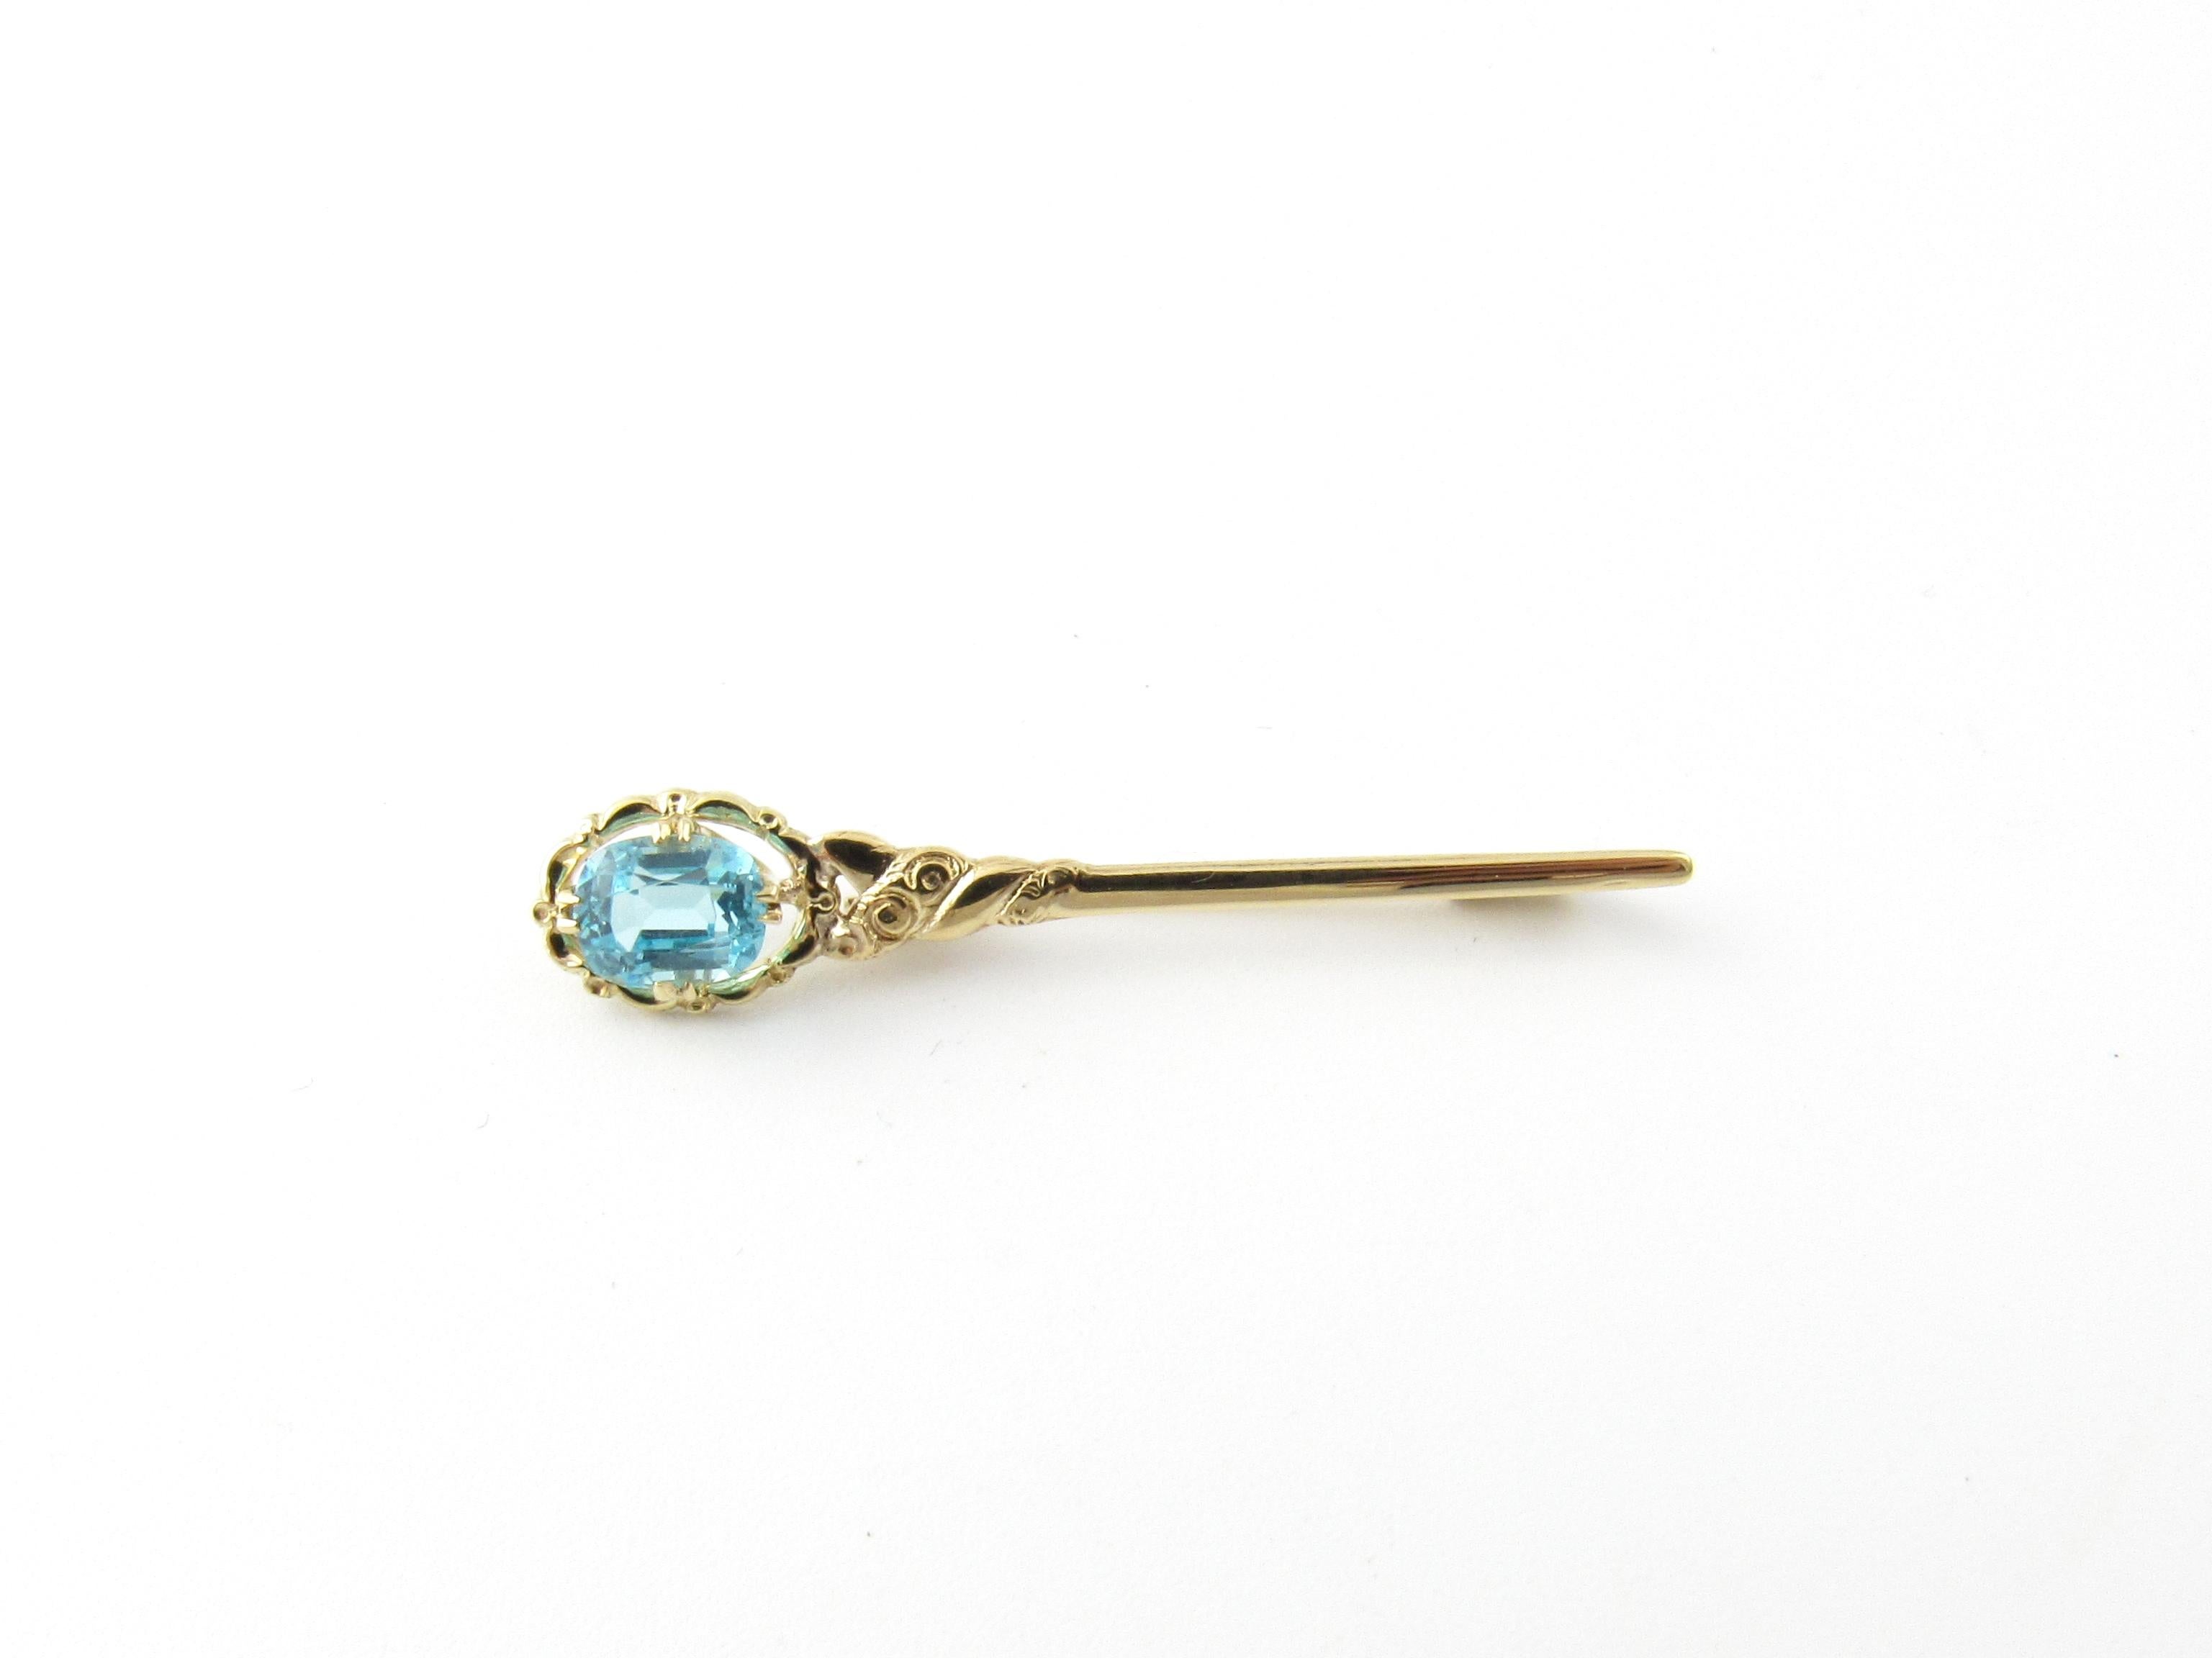 Vintage 14 Karat Yellow Gold Blue Topaz Brooch/Pin

This lovely pin features one oval blue topaz (7 mm x 5 mm) set in beautifully detailed 14K yellow gold.

Size: 37 mm x 7 mm

Weight: 0.9 dwt. / 1.4 gr.

Stamped: 585

Very good condition,